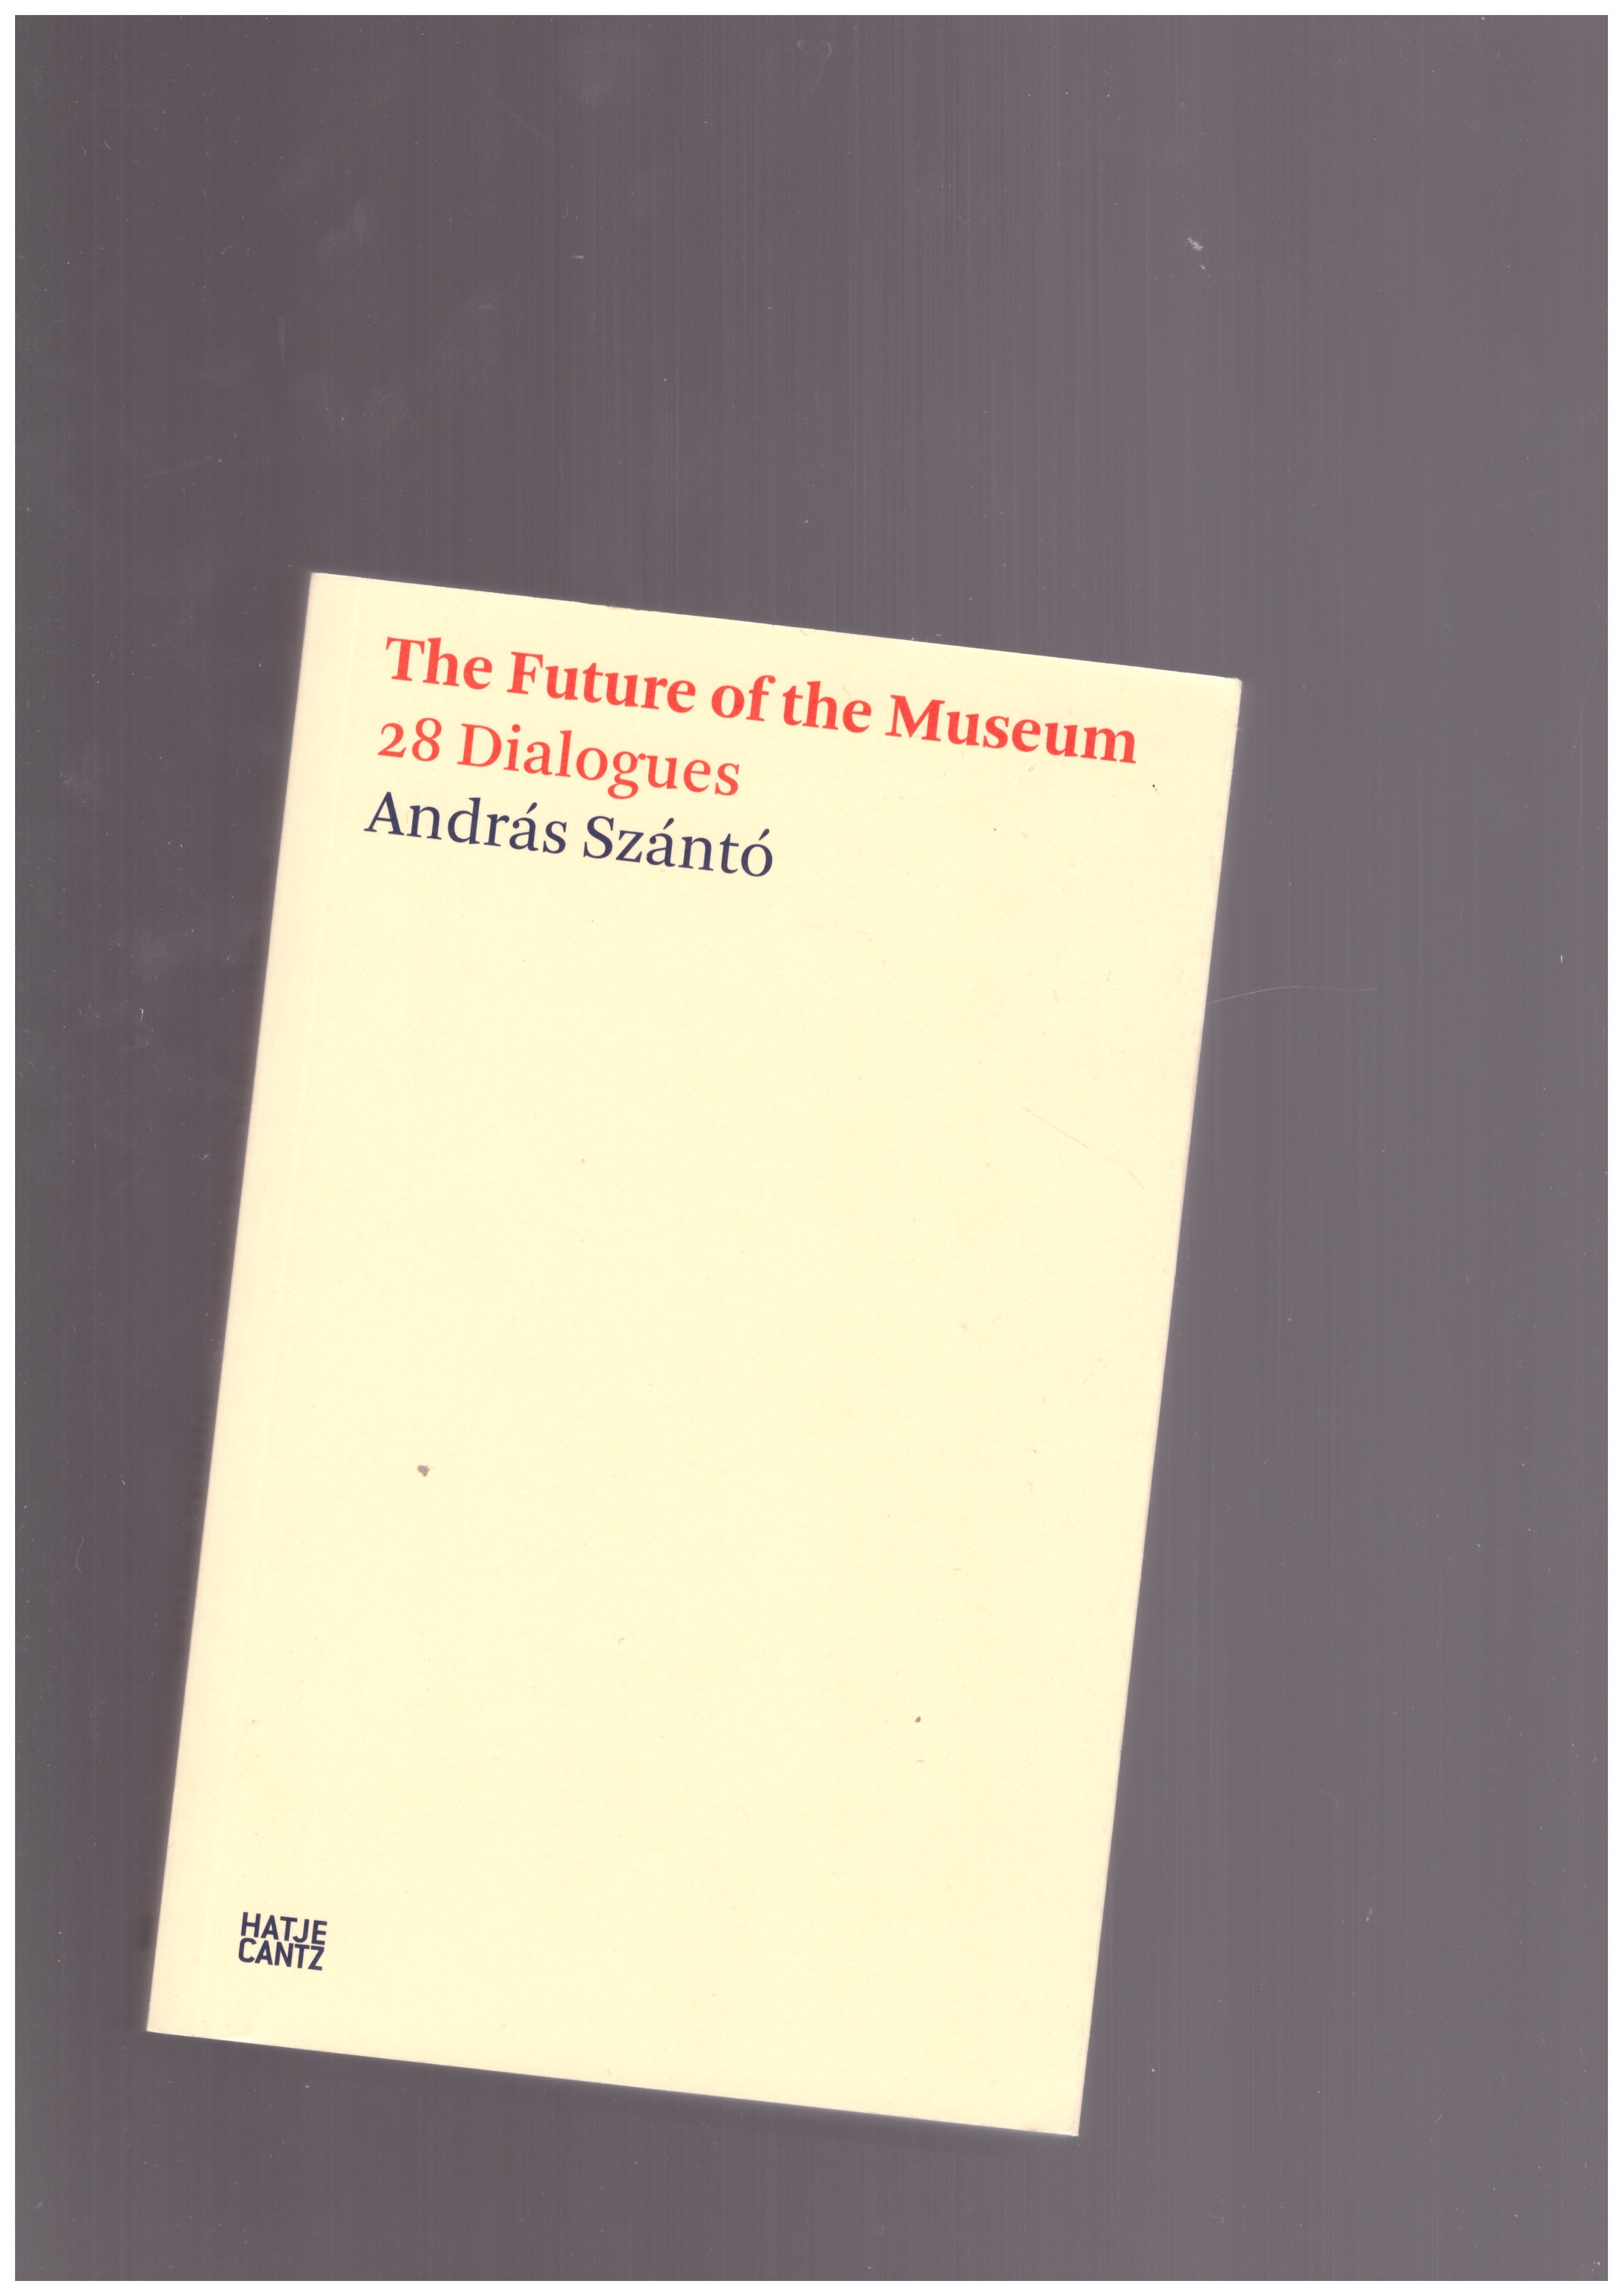 SZÁNTÓ, András - The Future of the Museum - 28 Dialogues